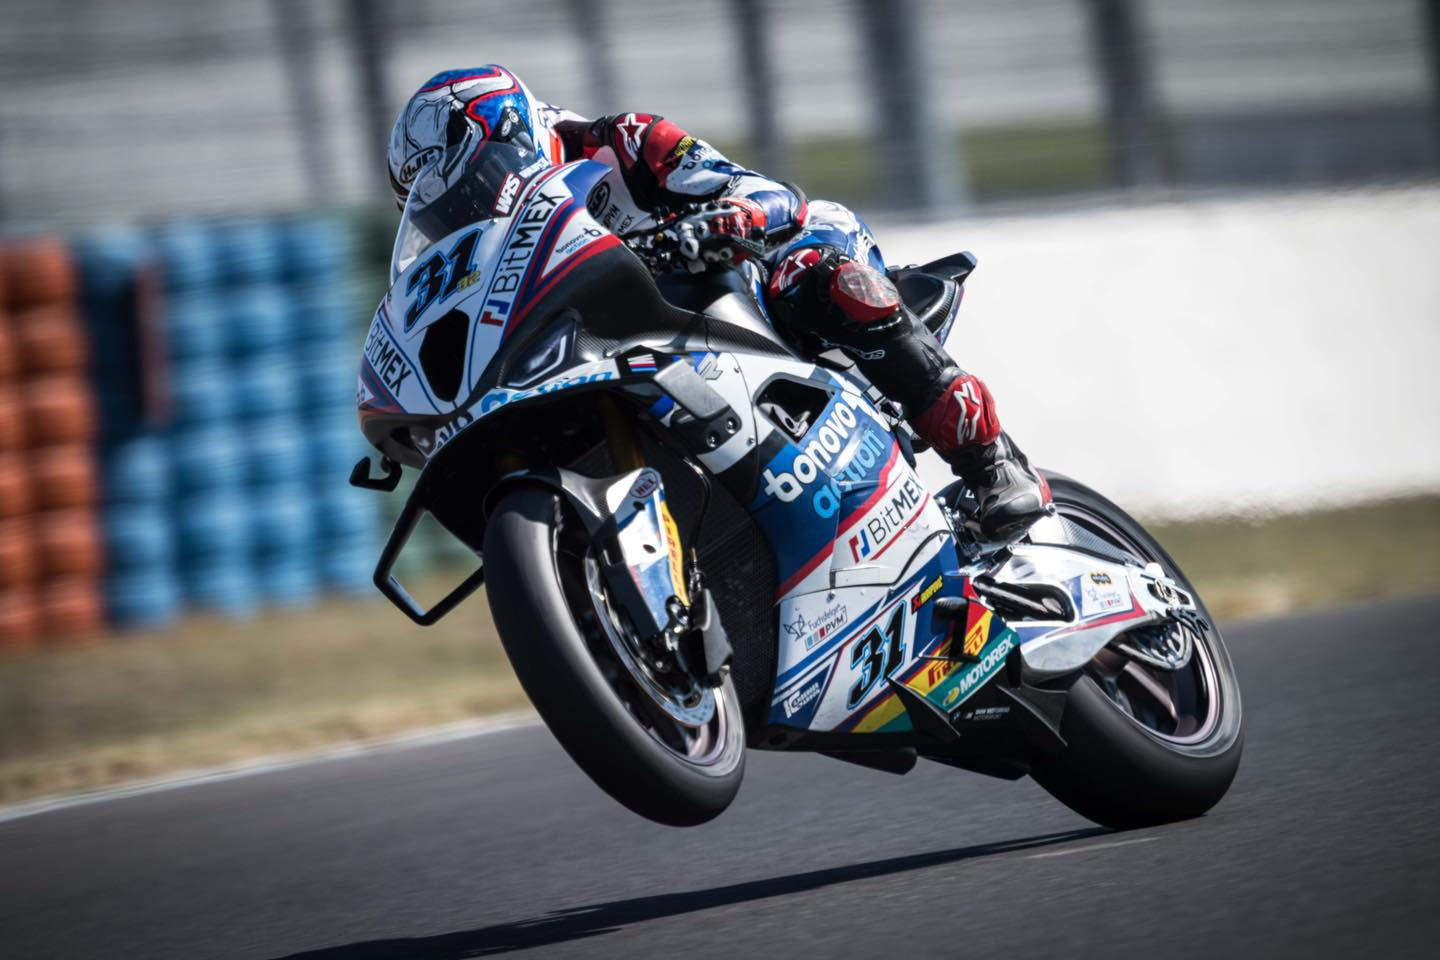 WorldSBK: Gerloff Takes Pole Position At Magny-Cours - Roadracing 